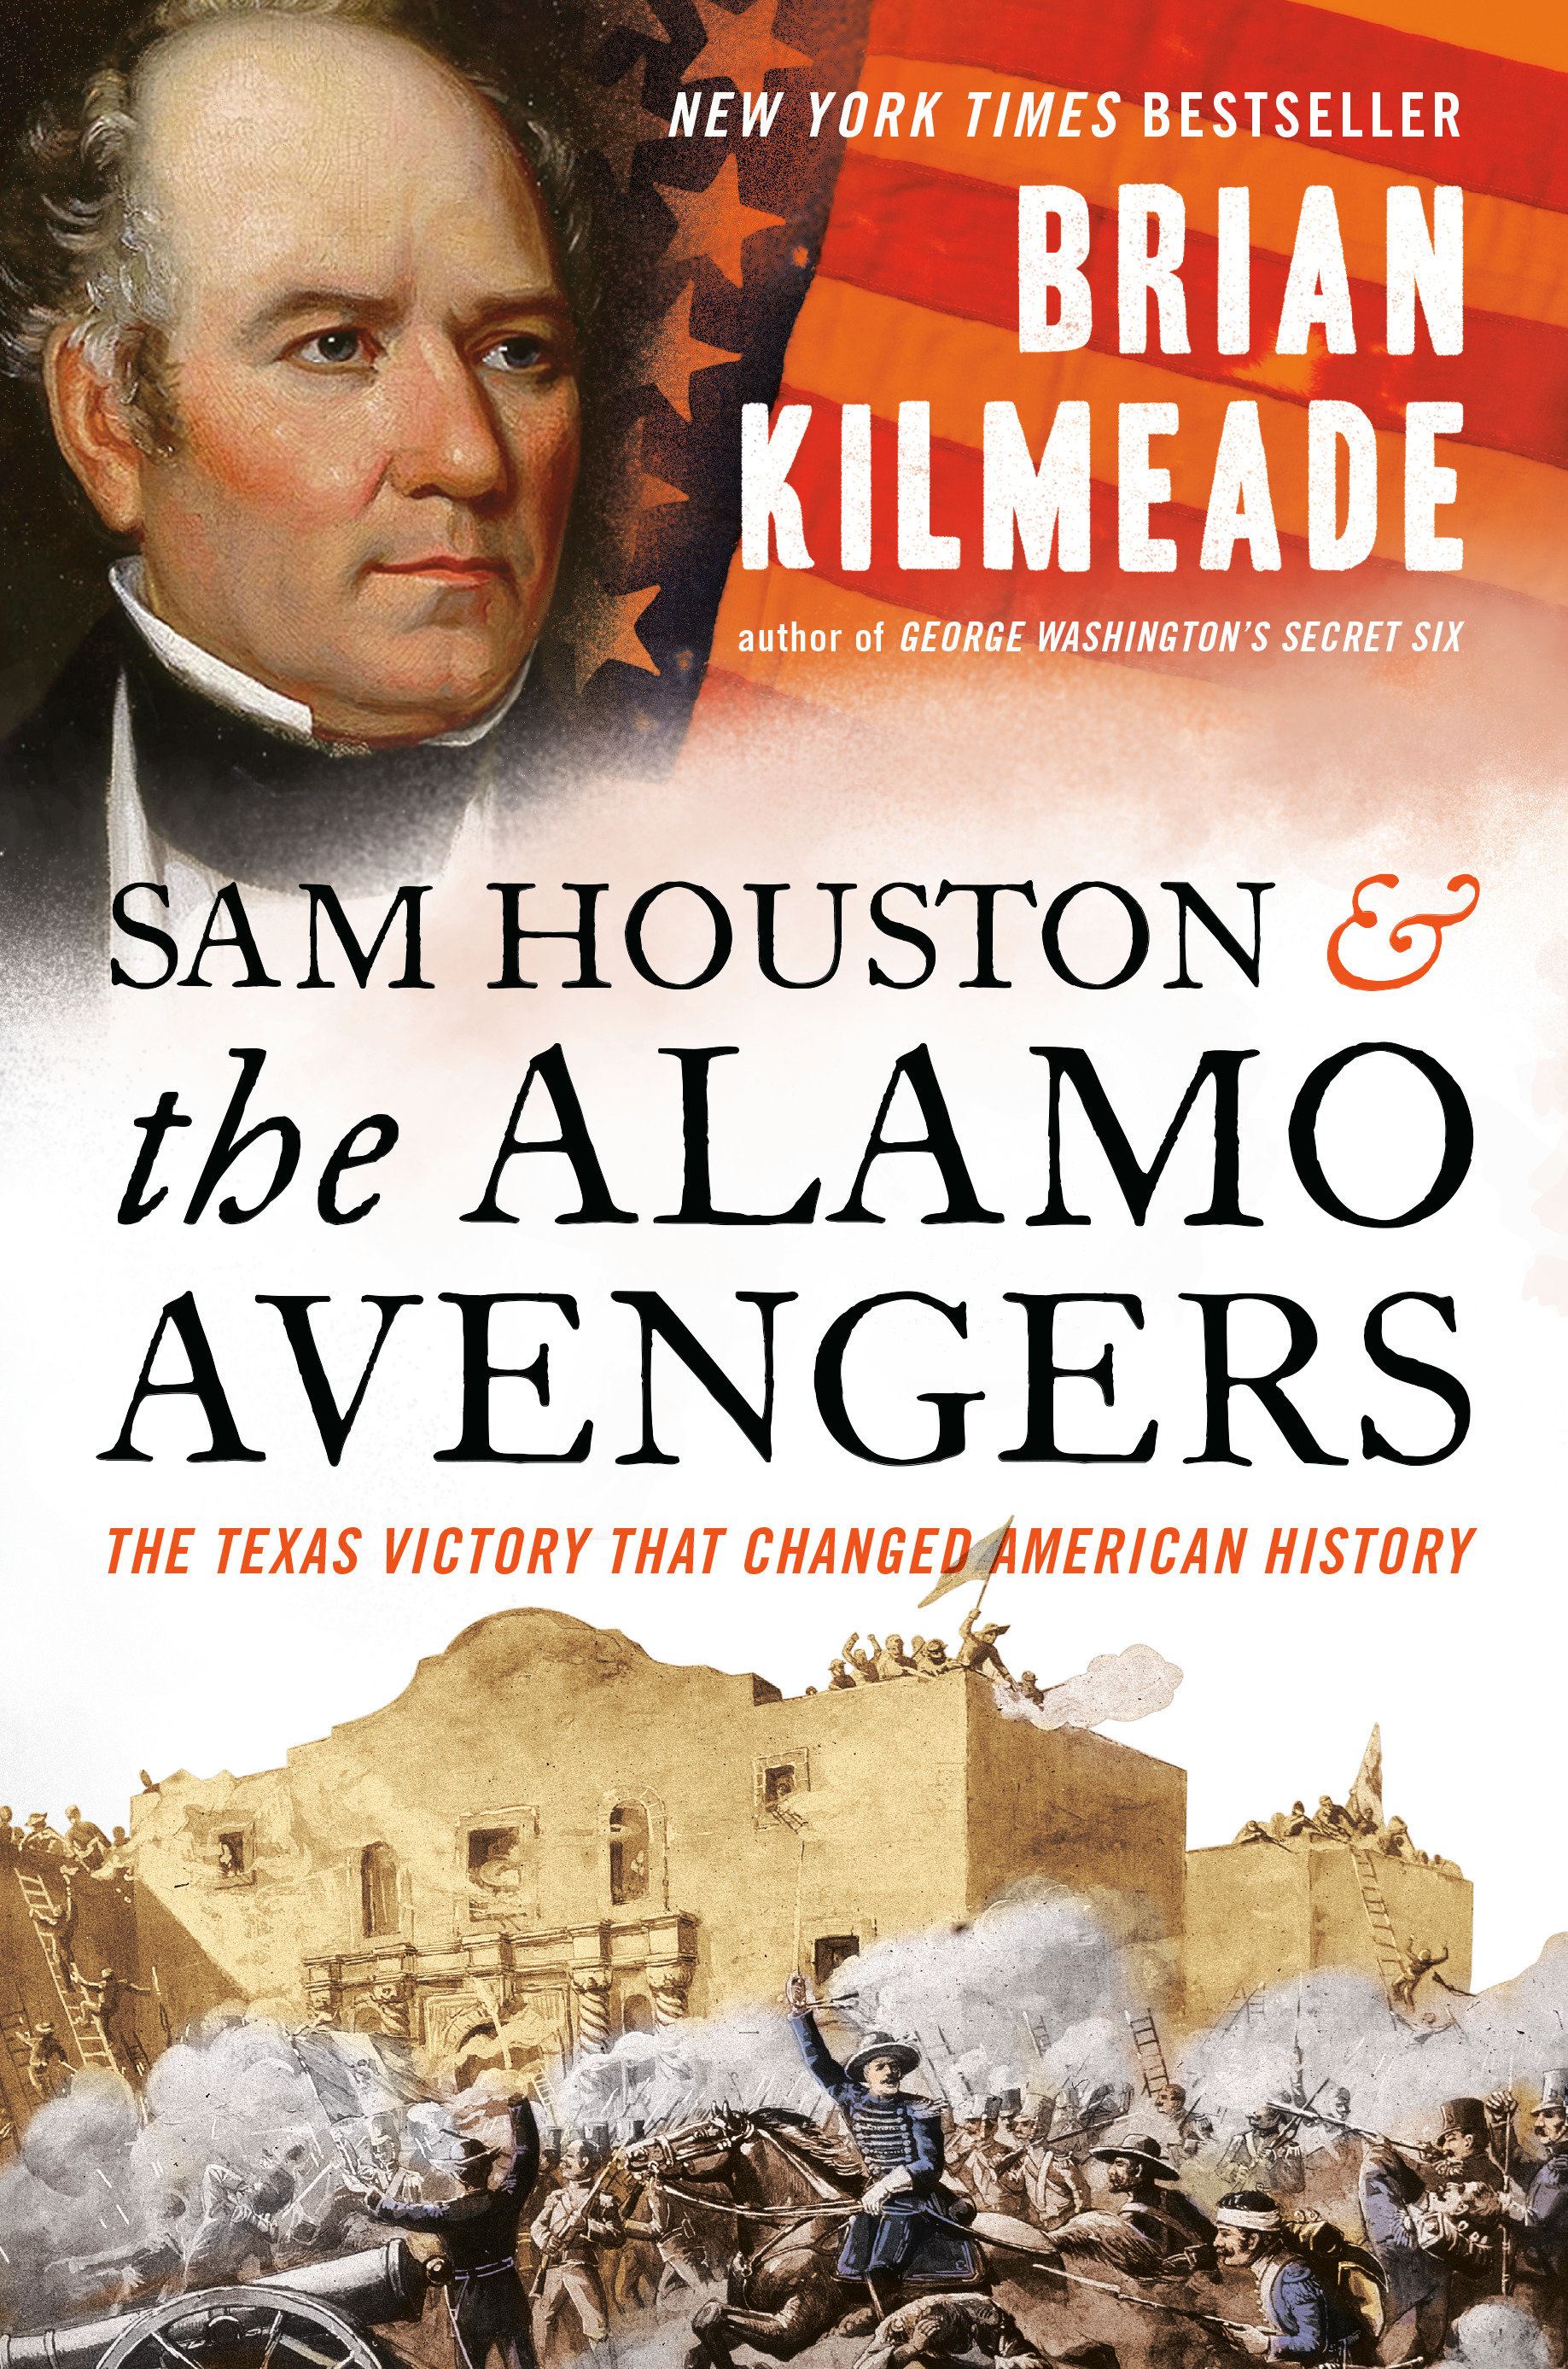 Sam Houston and the Alamo Avengers The Texas Victory That Changed American History cover image